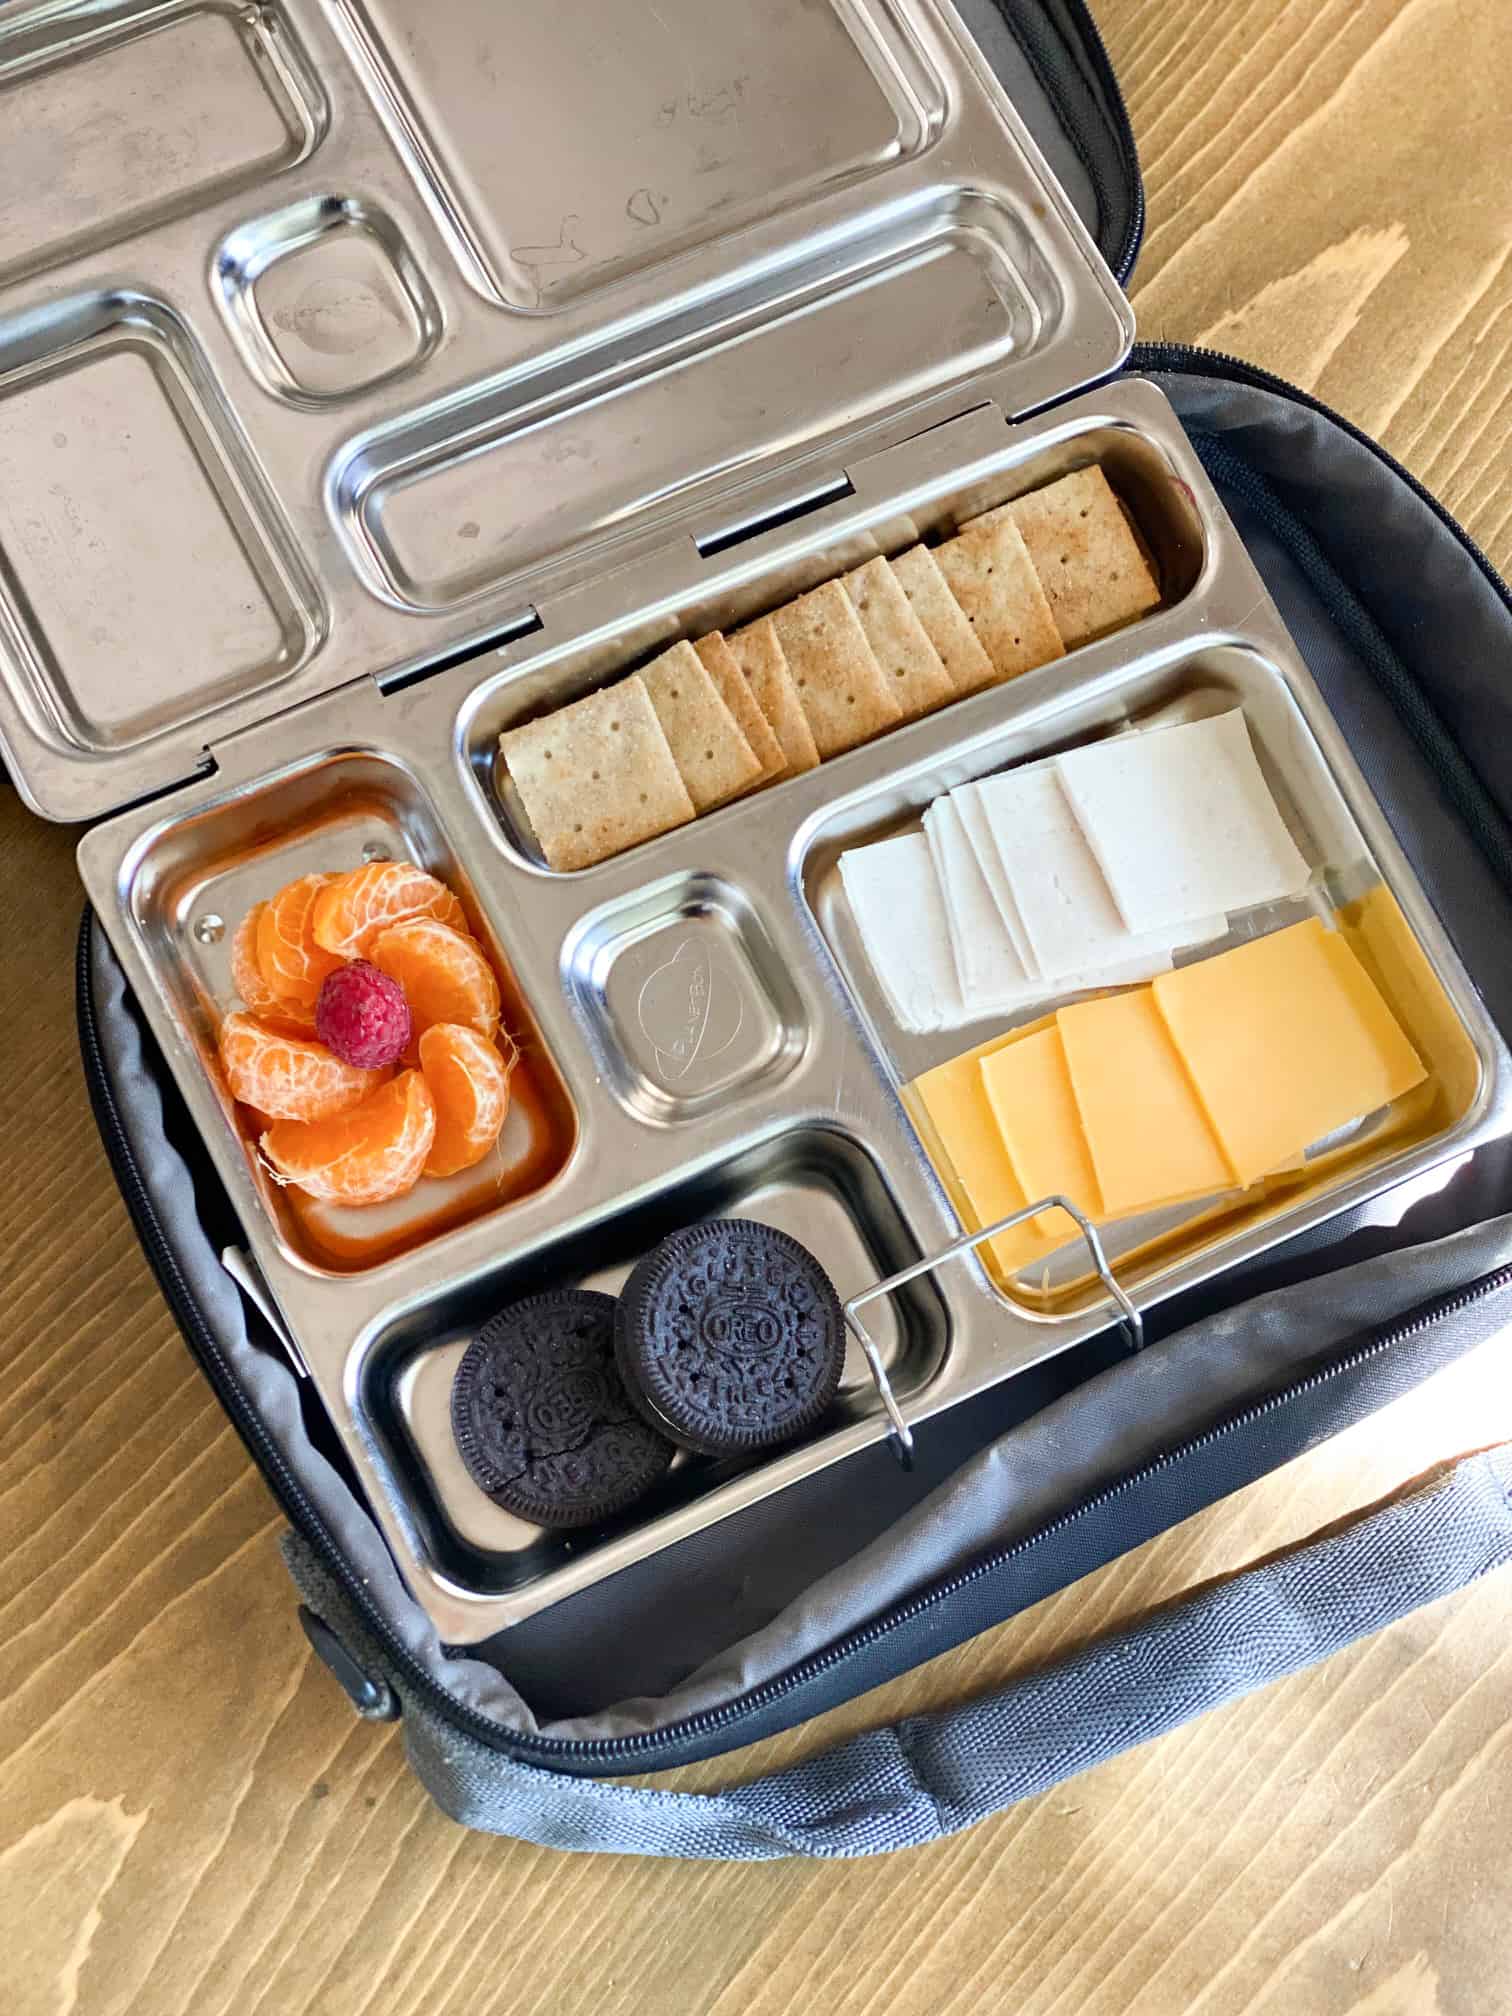 This rainy day bento box lunch is so cute and super easy to make! Make your little one smile with this easy bento box lunch. www.glutenfreefrenzy.com